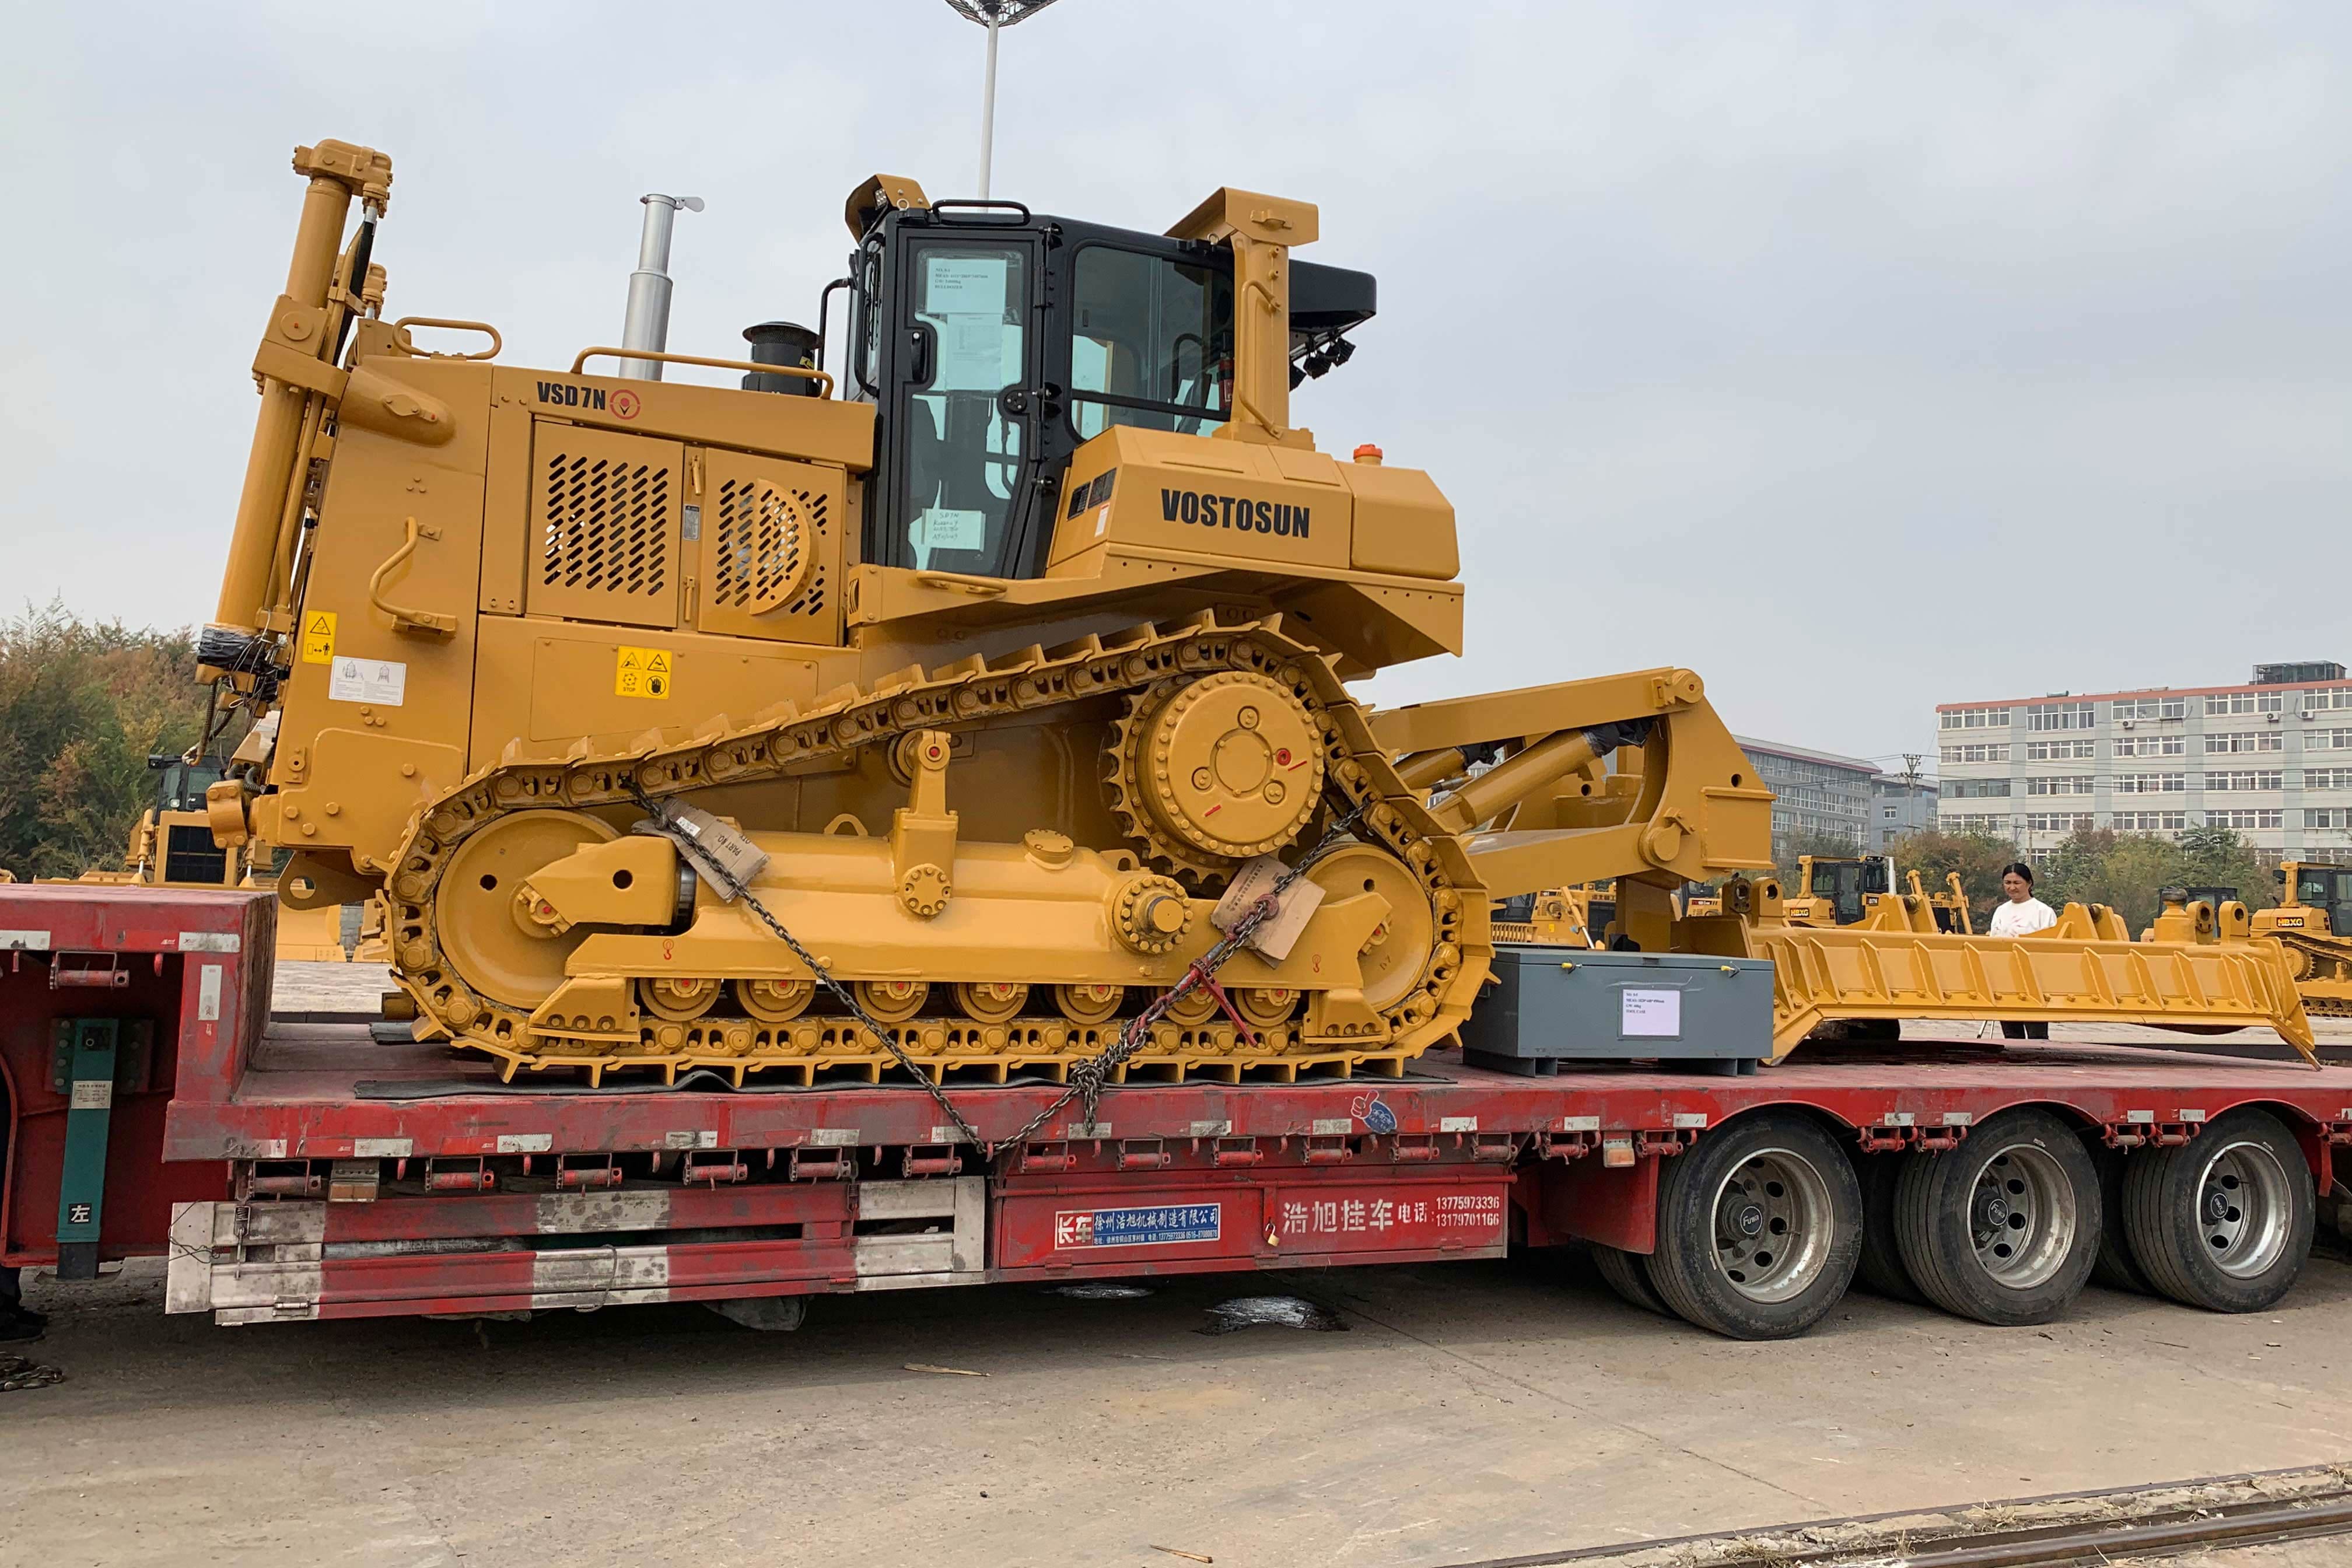 On October 20, 2020, VOSTOSUN’s bulldozer VSD7N began to be transported to Russia